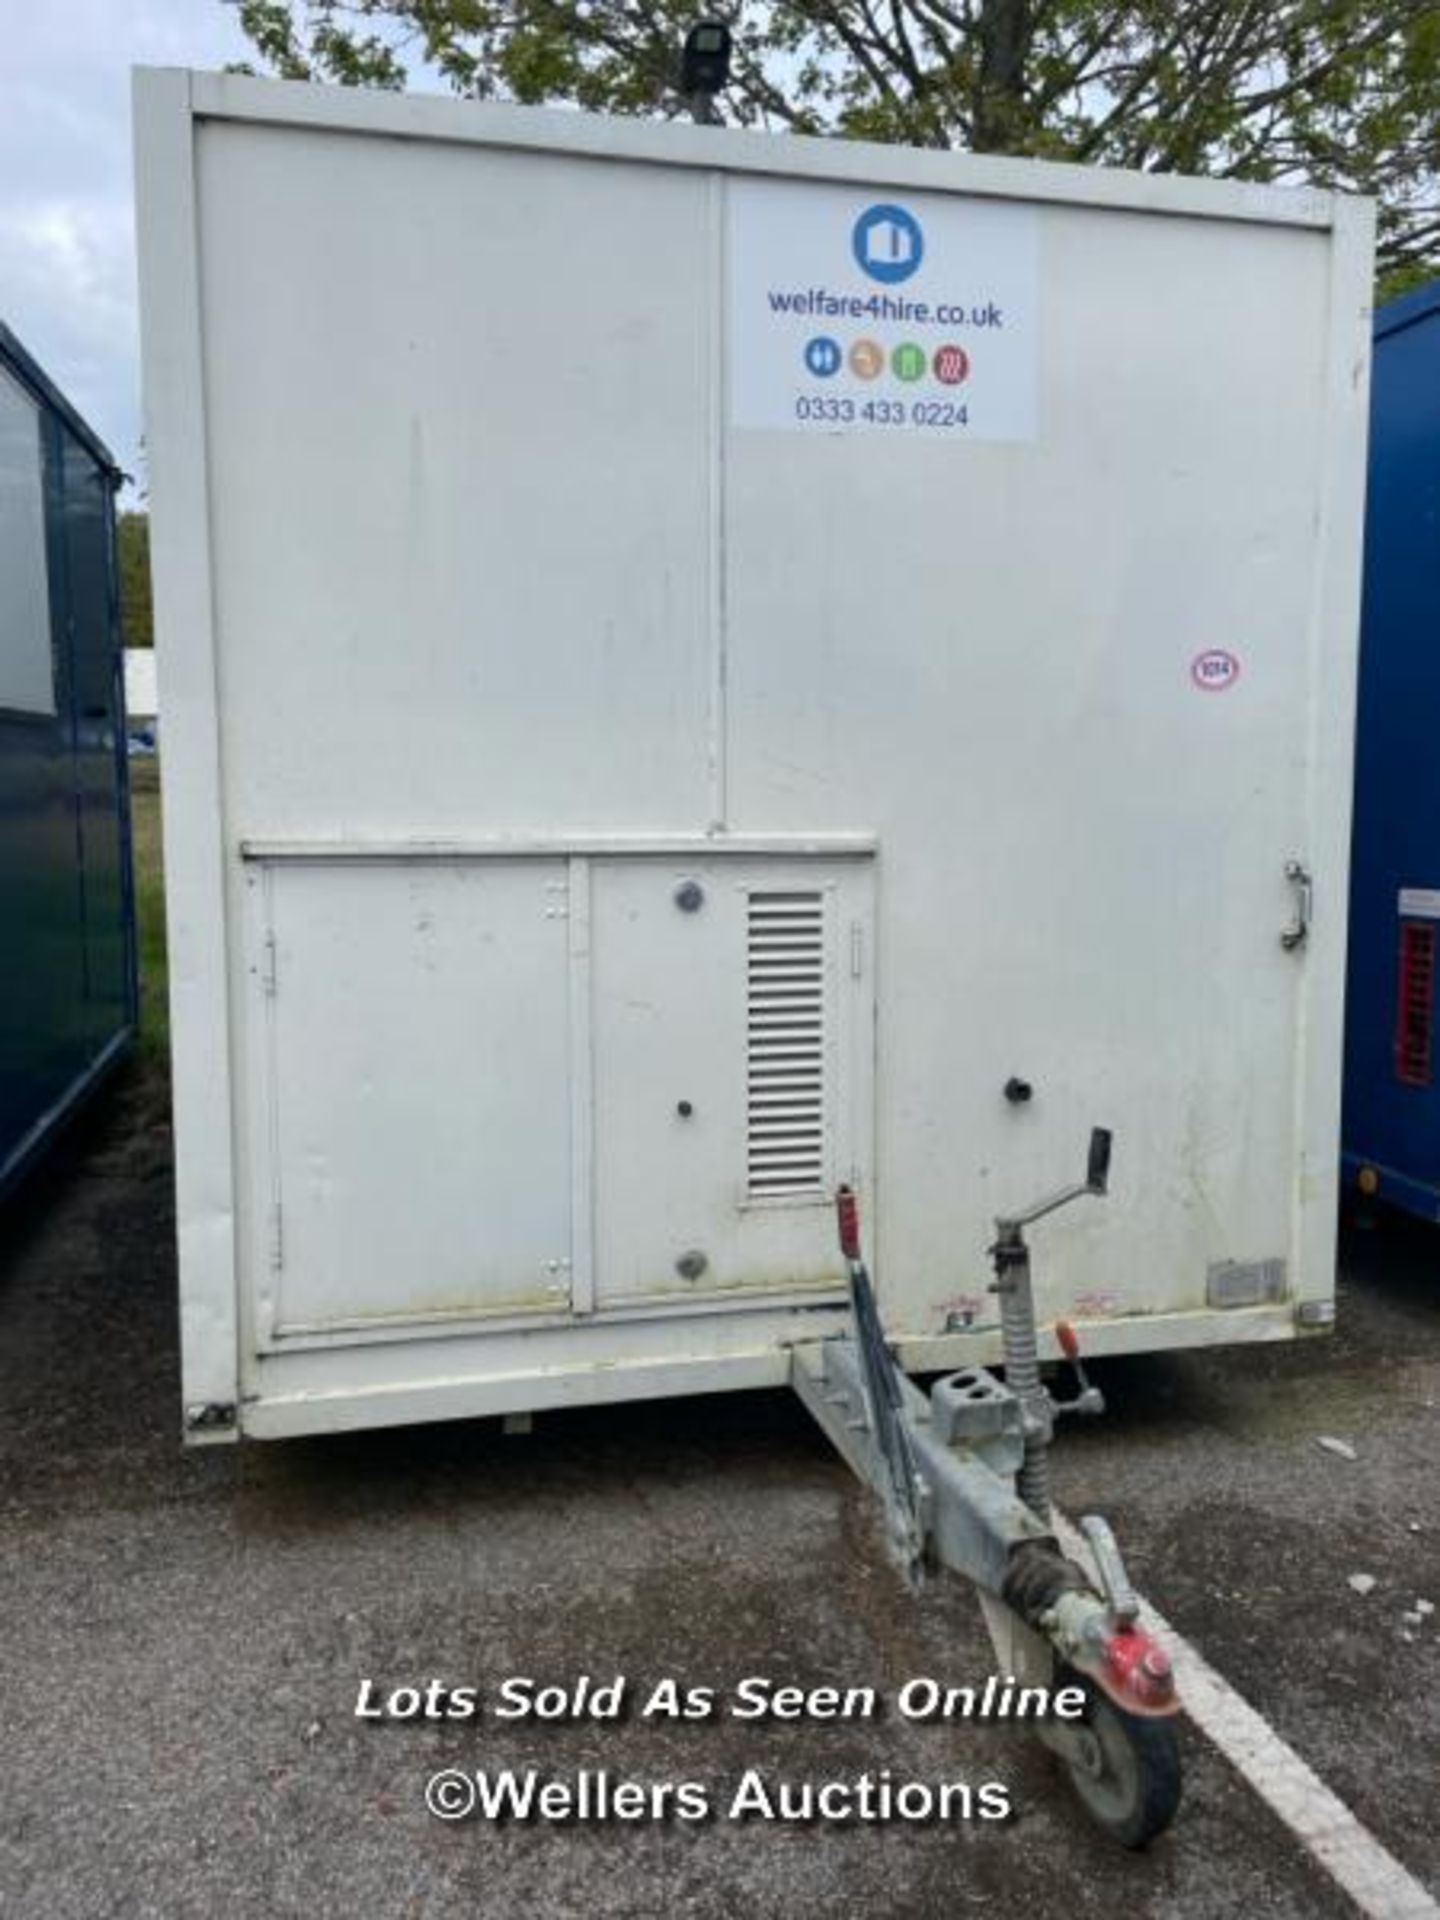 6 PERSON 12 X 7.5FT AJC EASY CABIN TOWABLE WELFARE UNIT, INCLUDES WASH BASIN, KETTLE, MICROWAVE, - Image 2 of 18